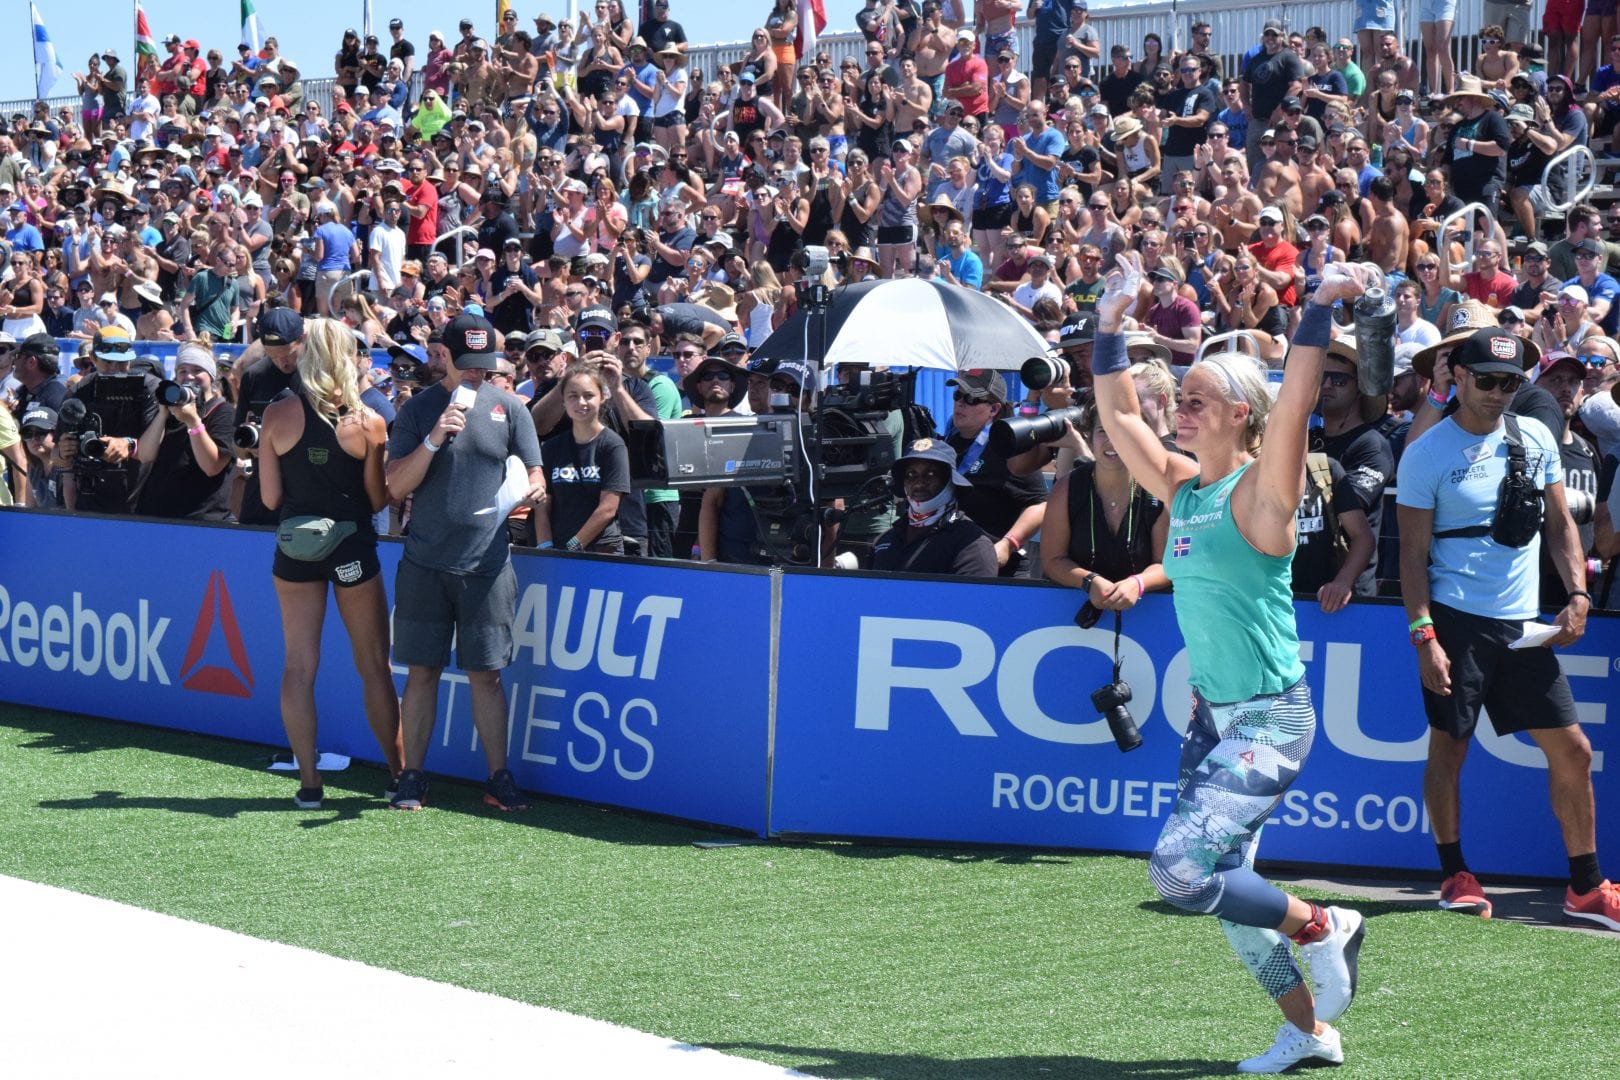 Sara Sigmundsdottir waves at the crowd as she enters the stadium for the first event of the 2019 CrossFit Games